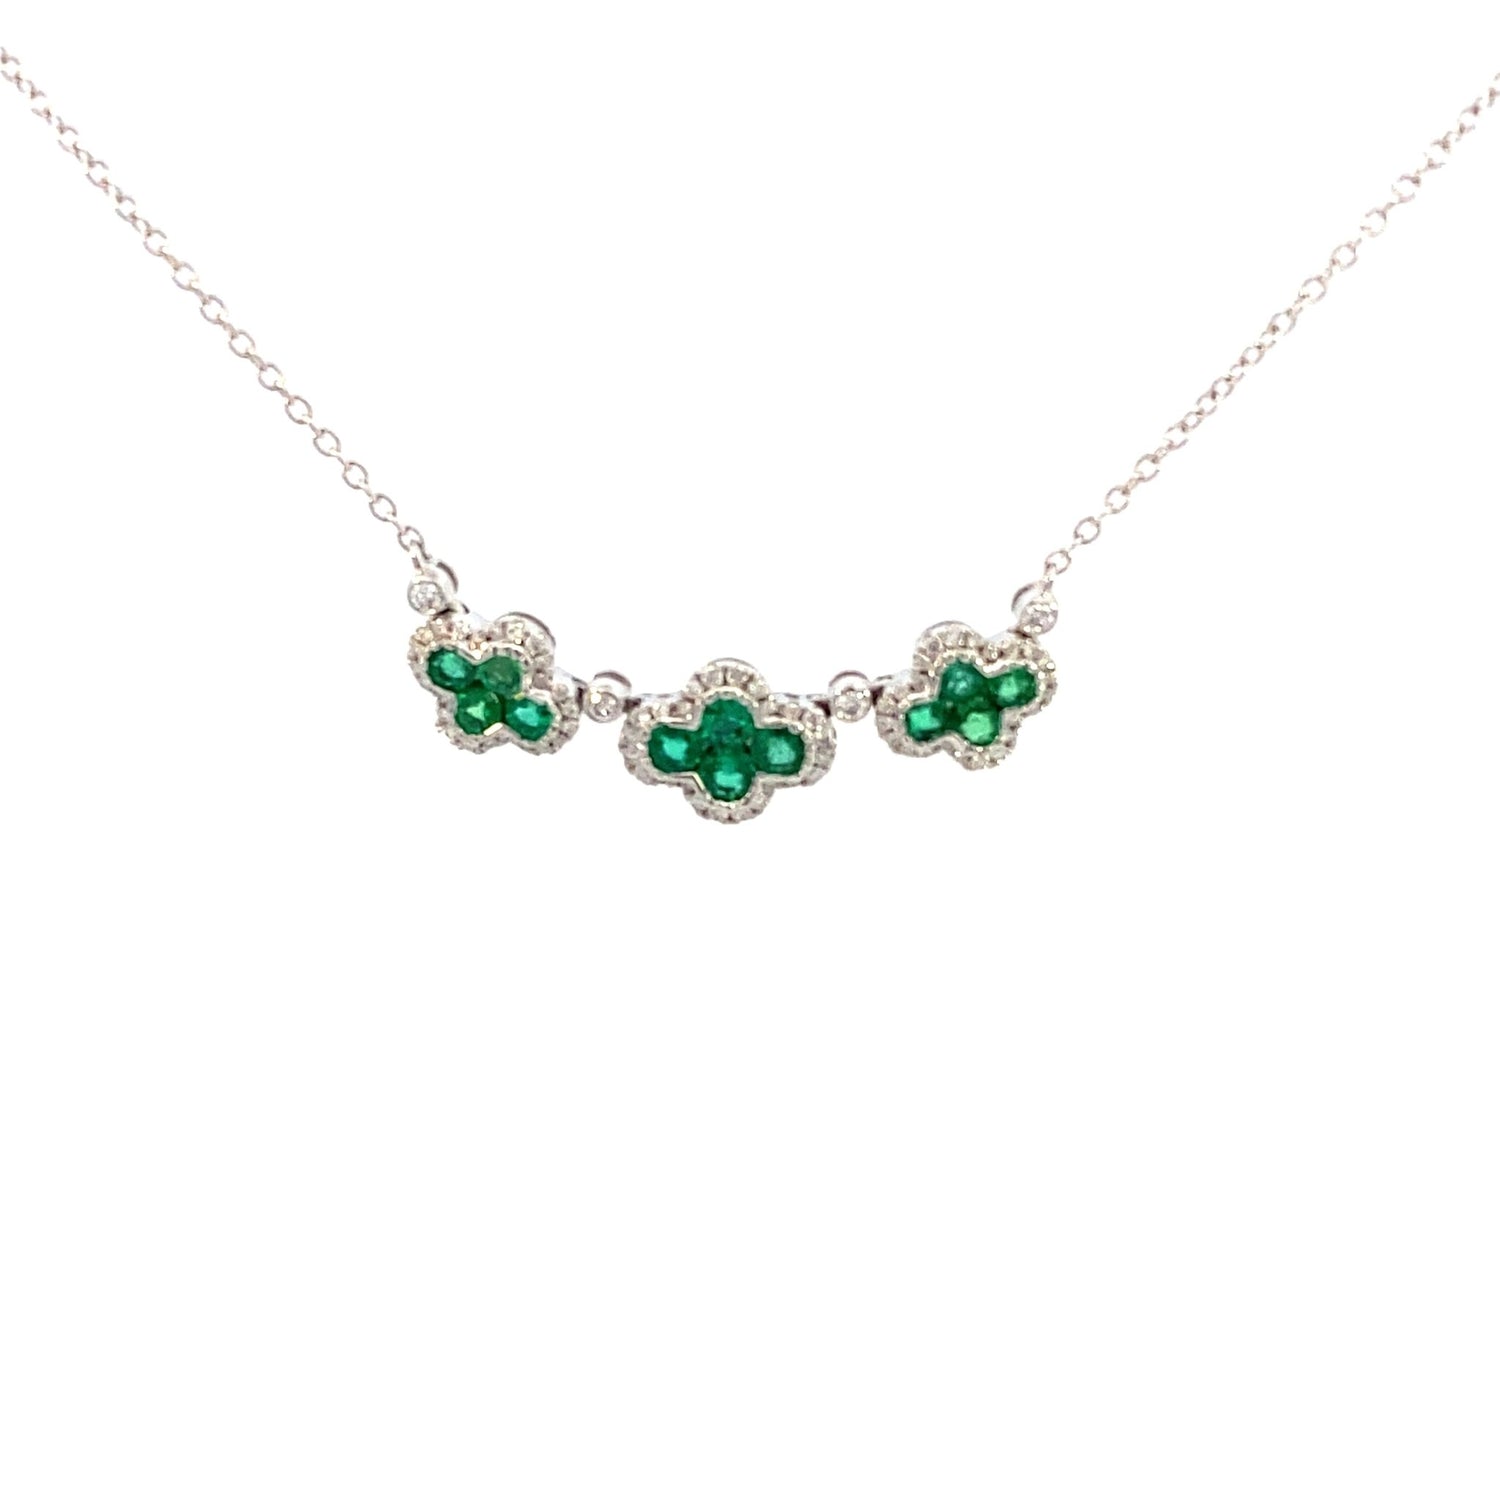 Necklace- 18k White Gold Emerald and Diamond 3 front station - Gaines Jewelers